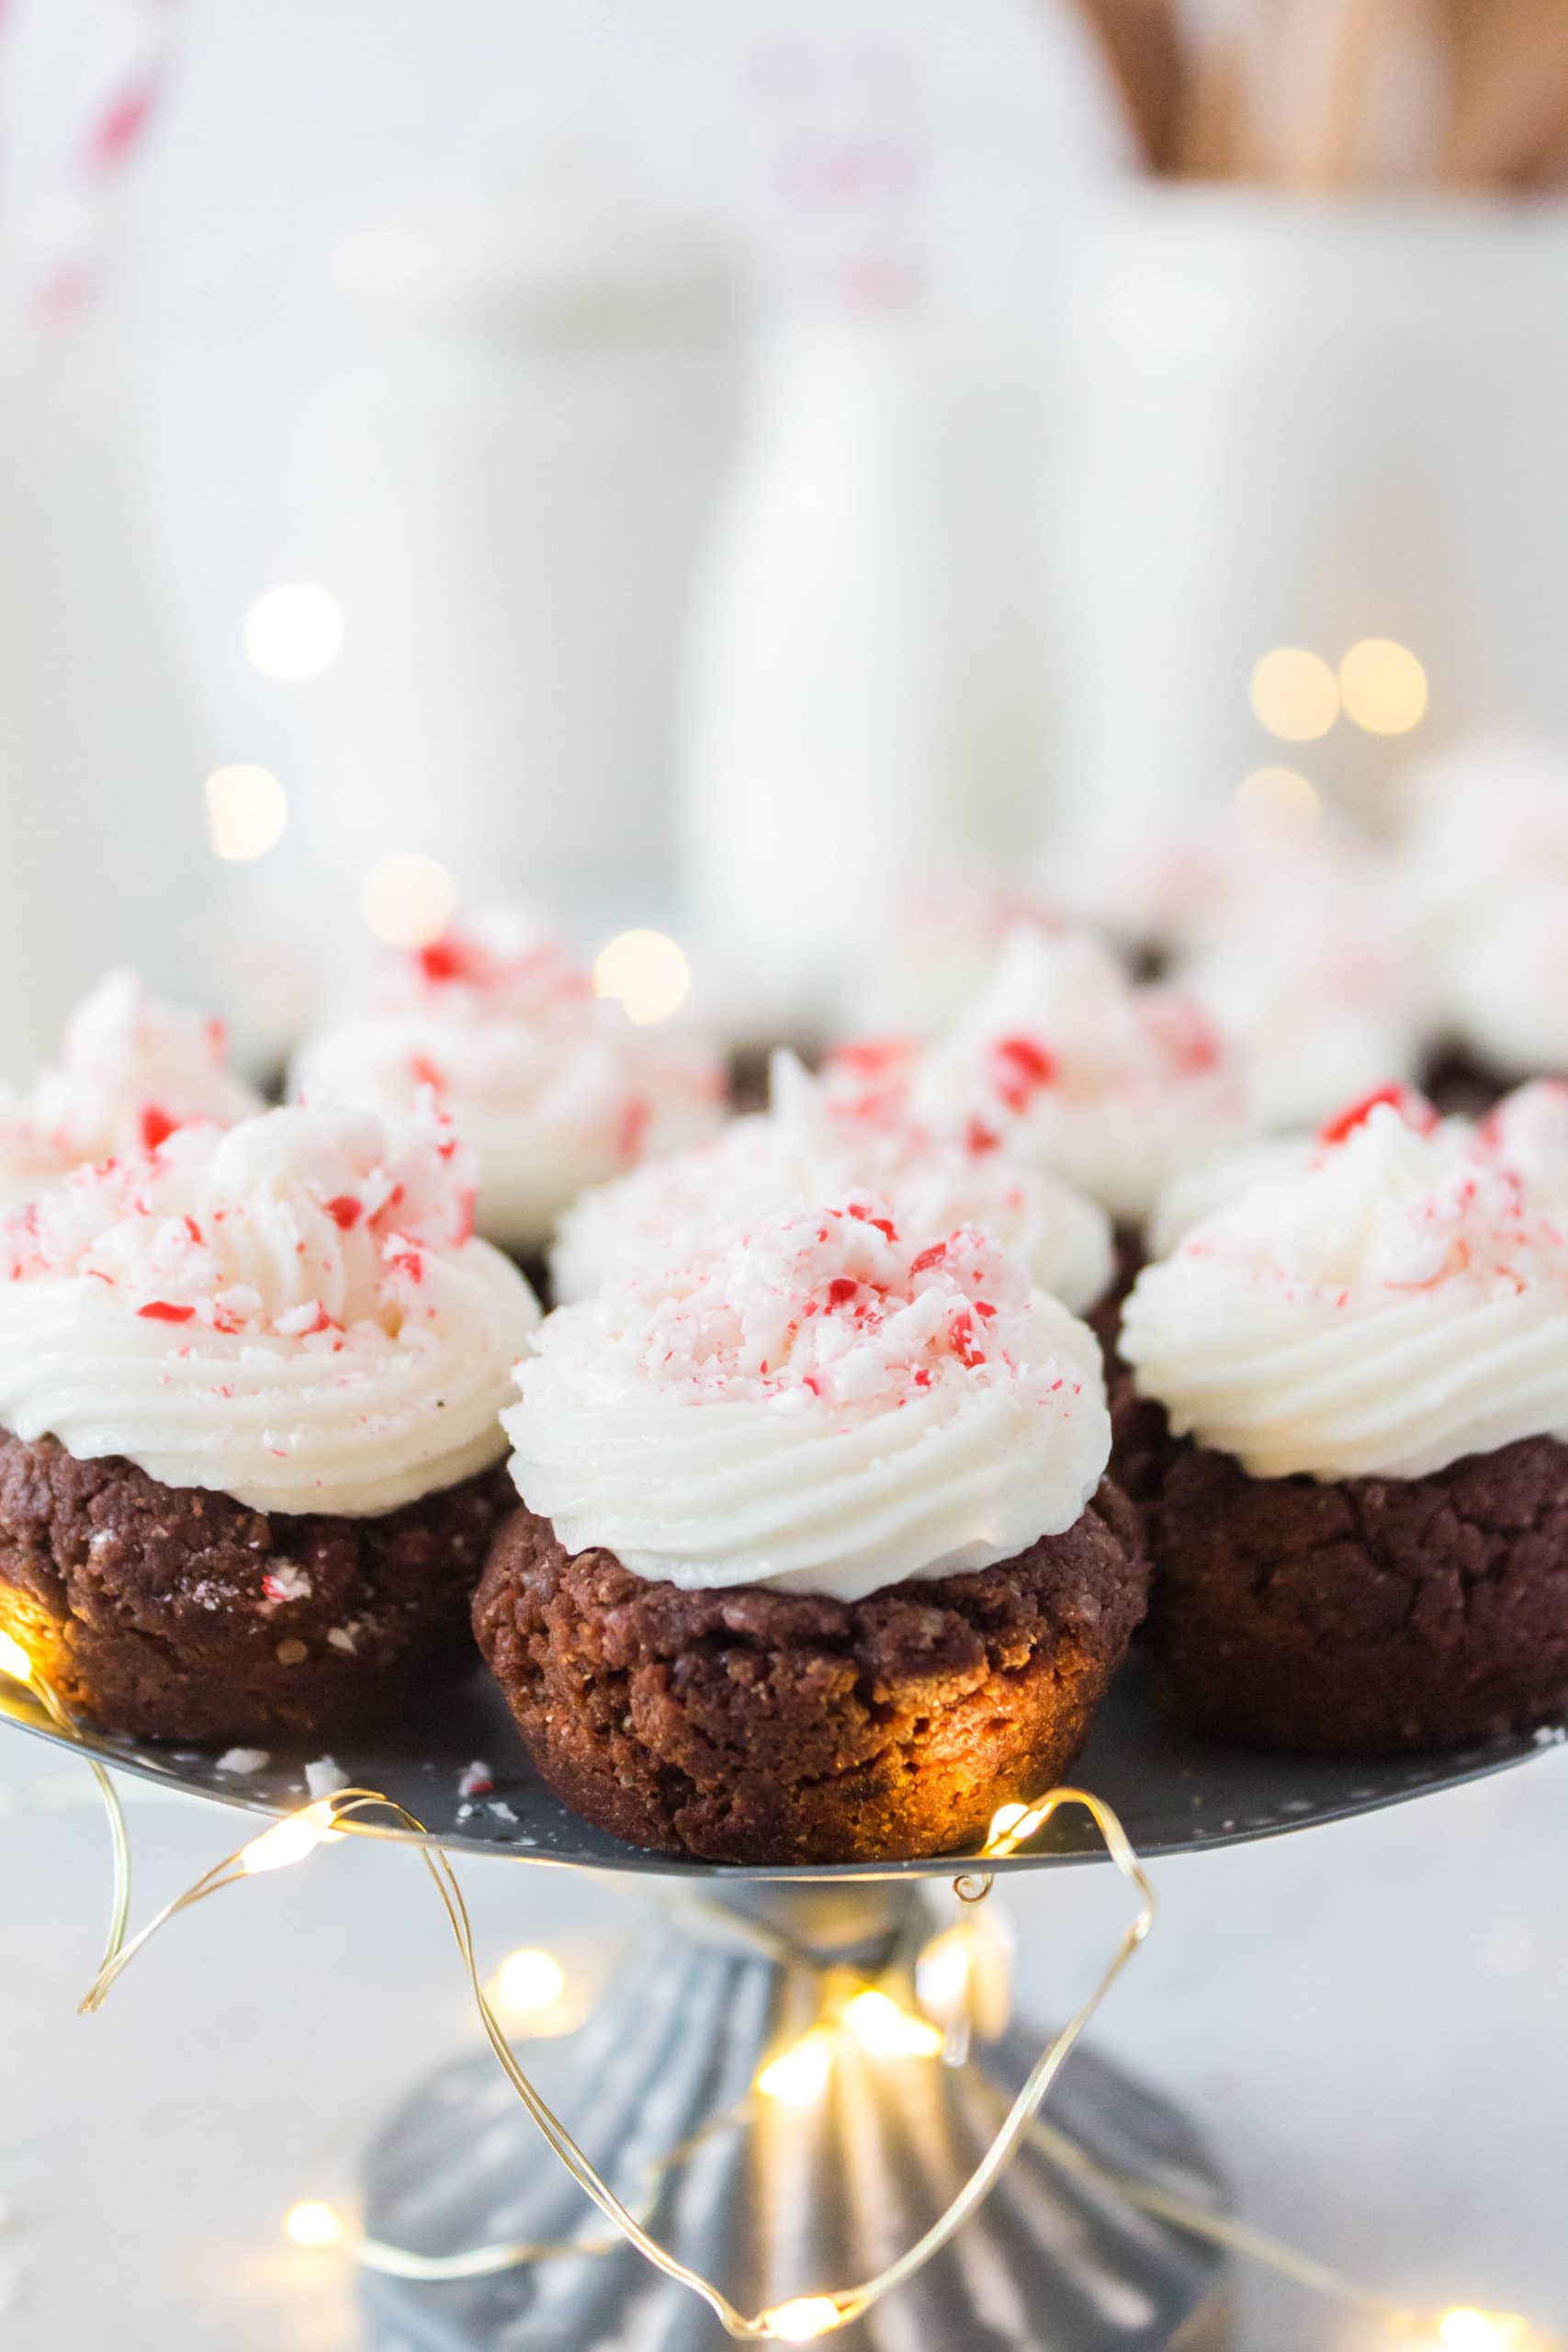 Naturally colored and super delicious, these Red Velvet Cookie Cups will be your new favorite holiday treat!